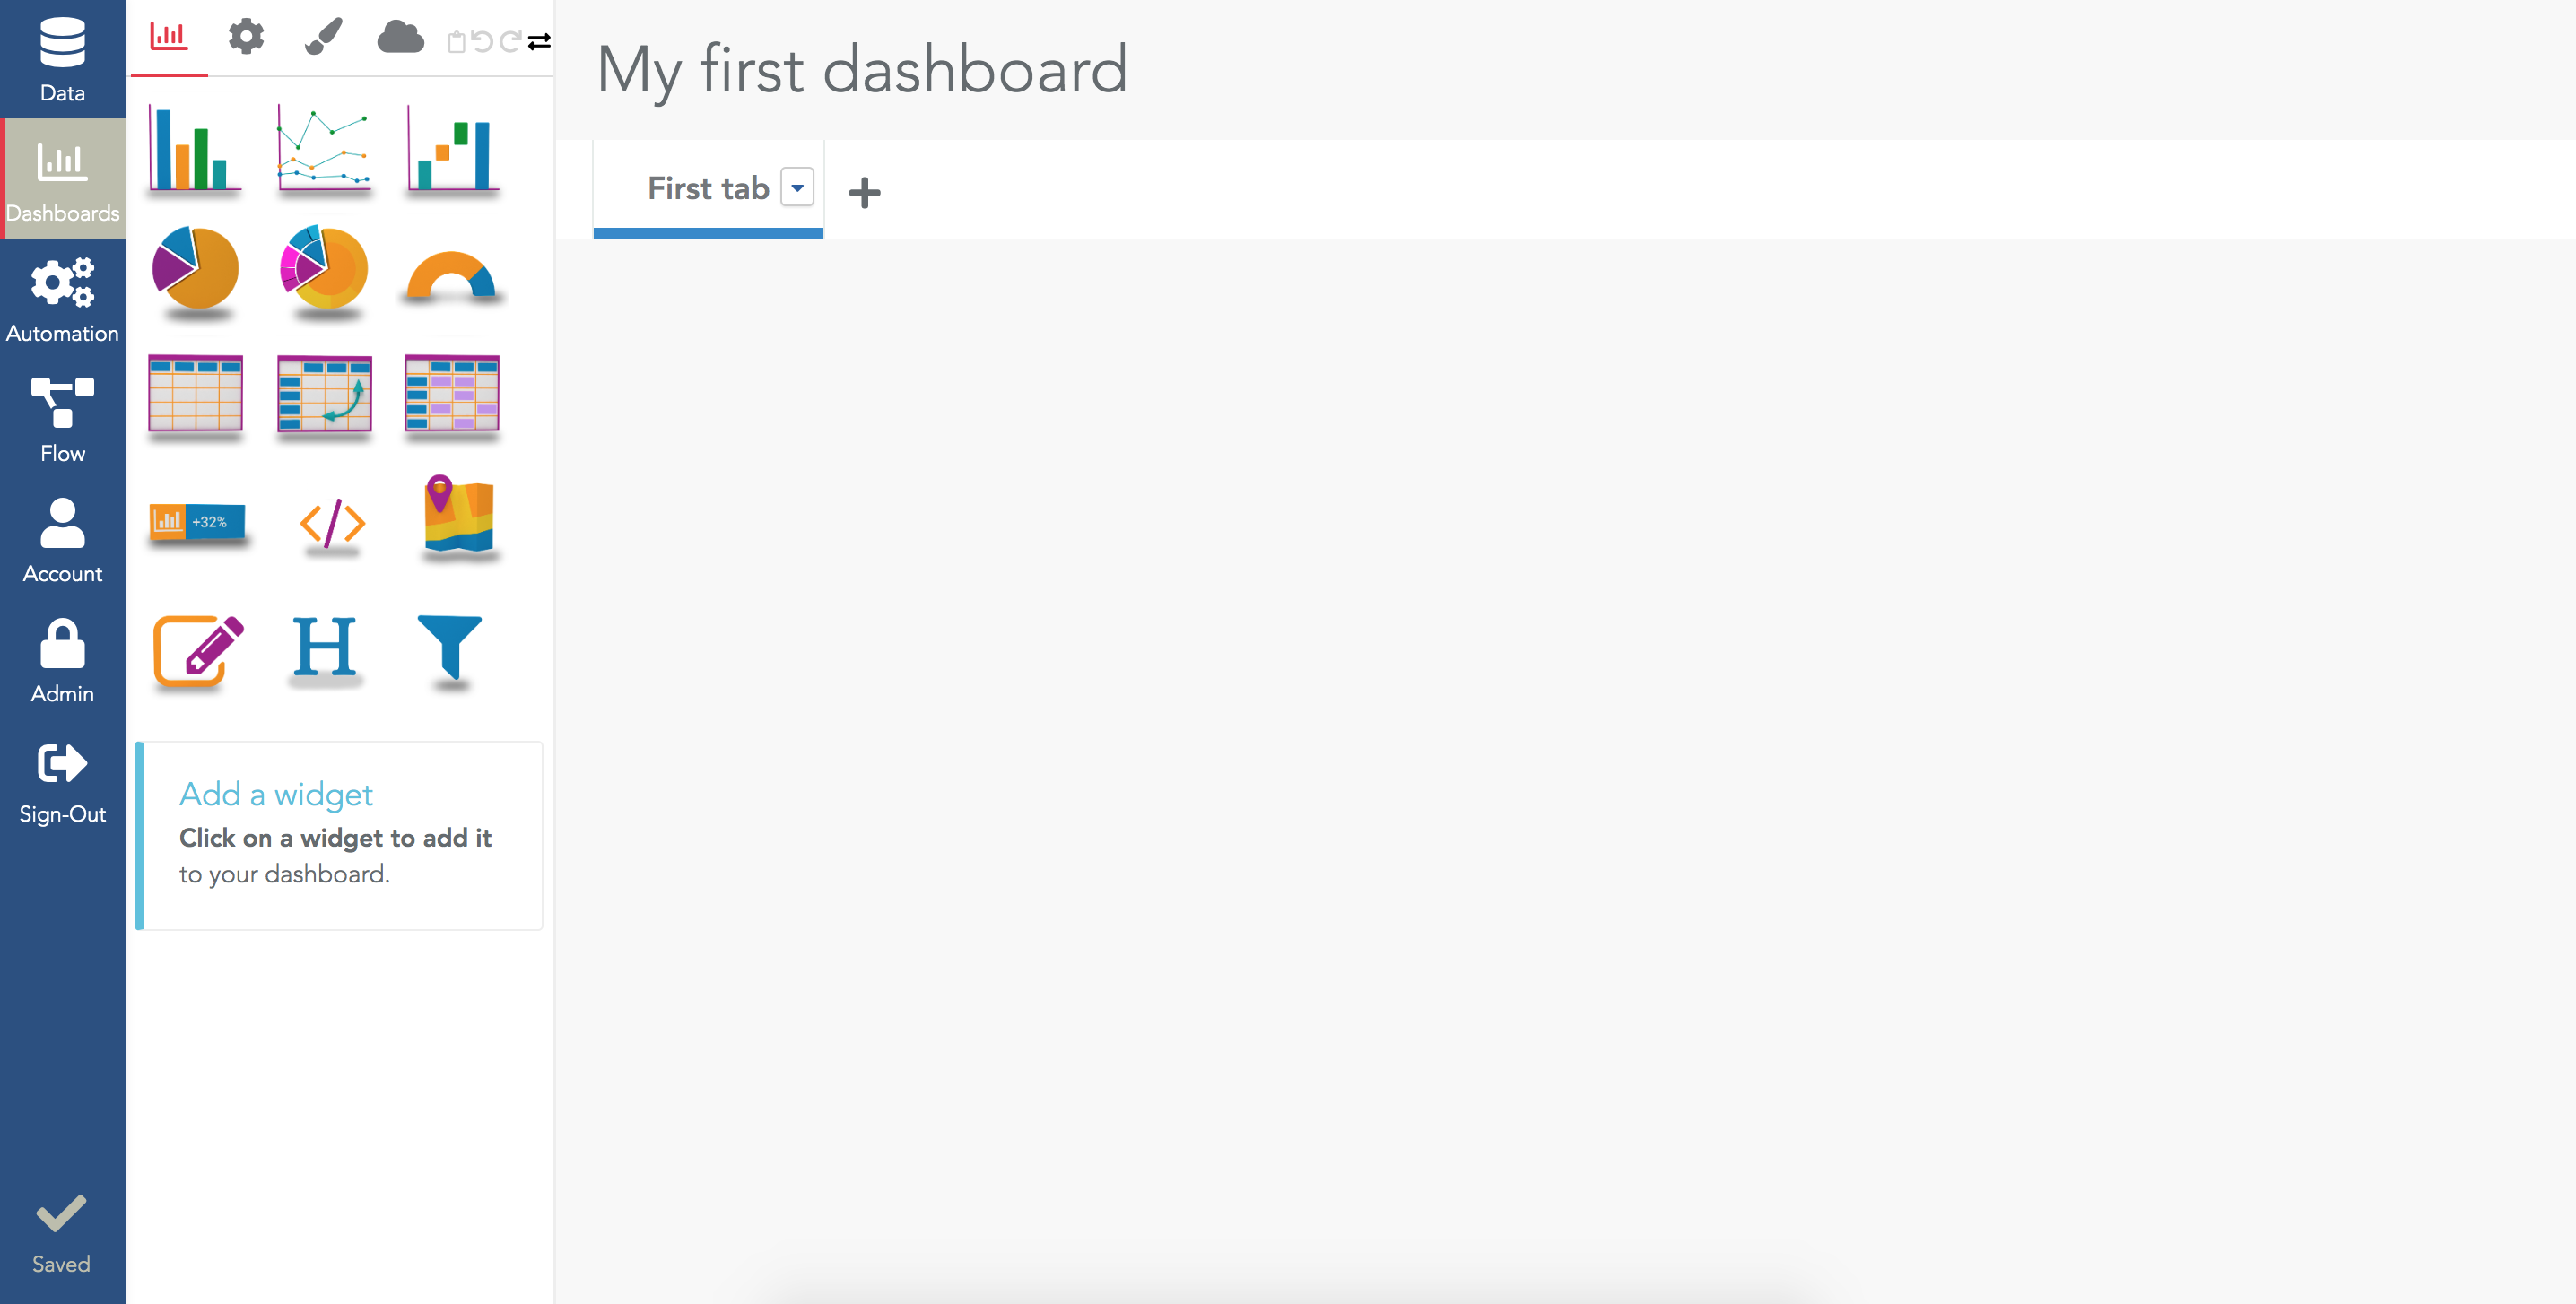 Empty dashboard after creation